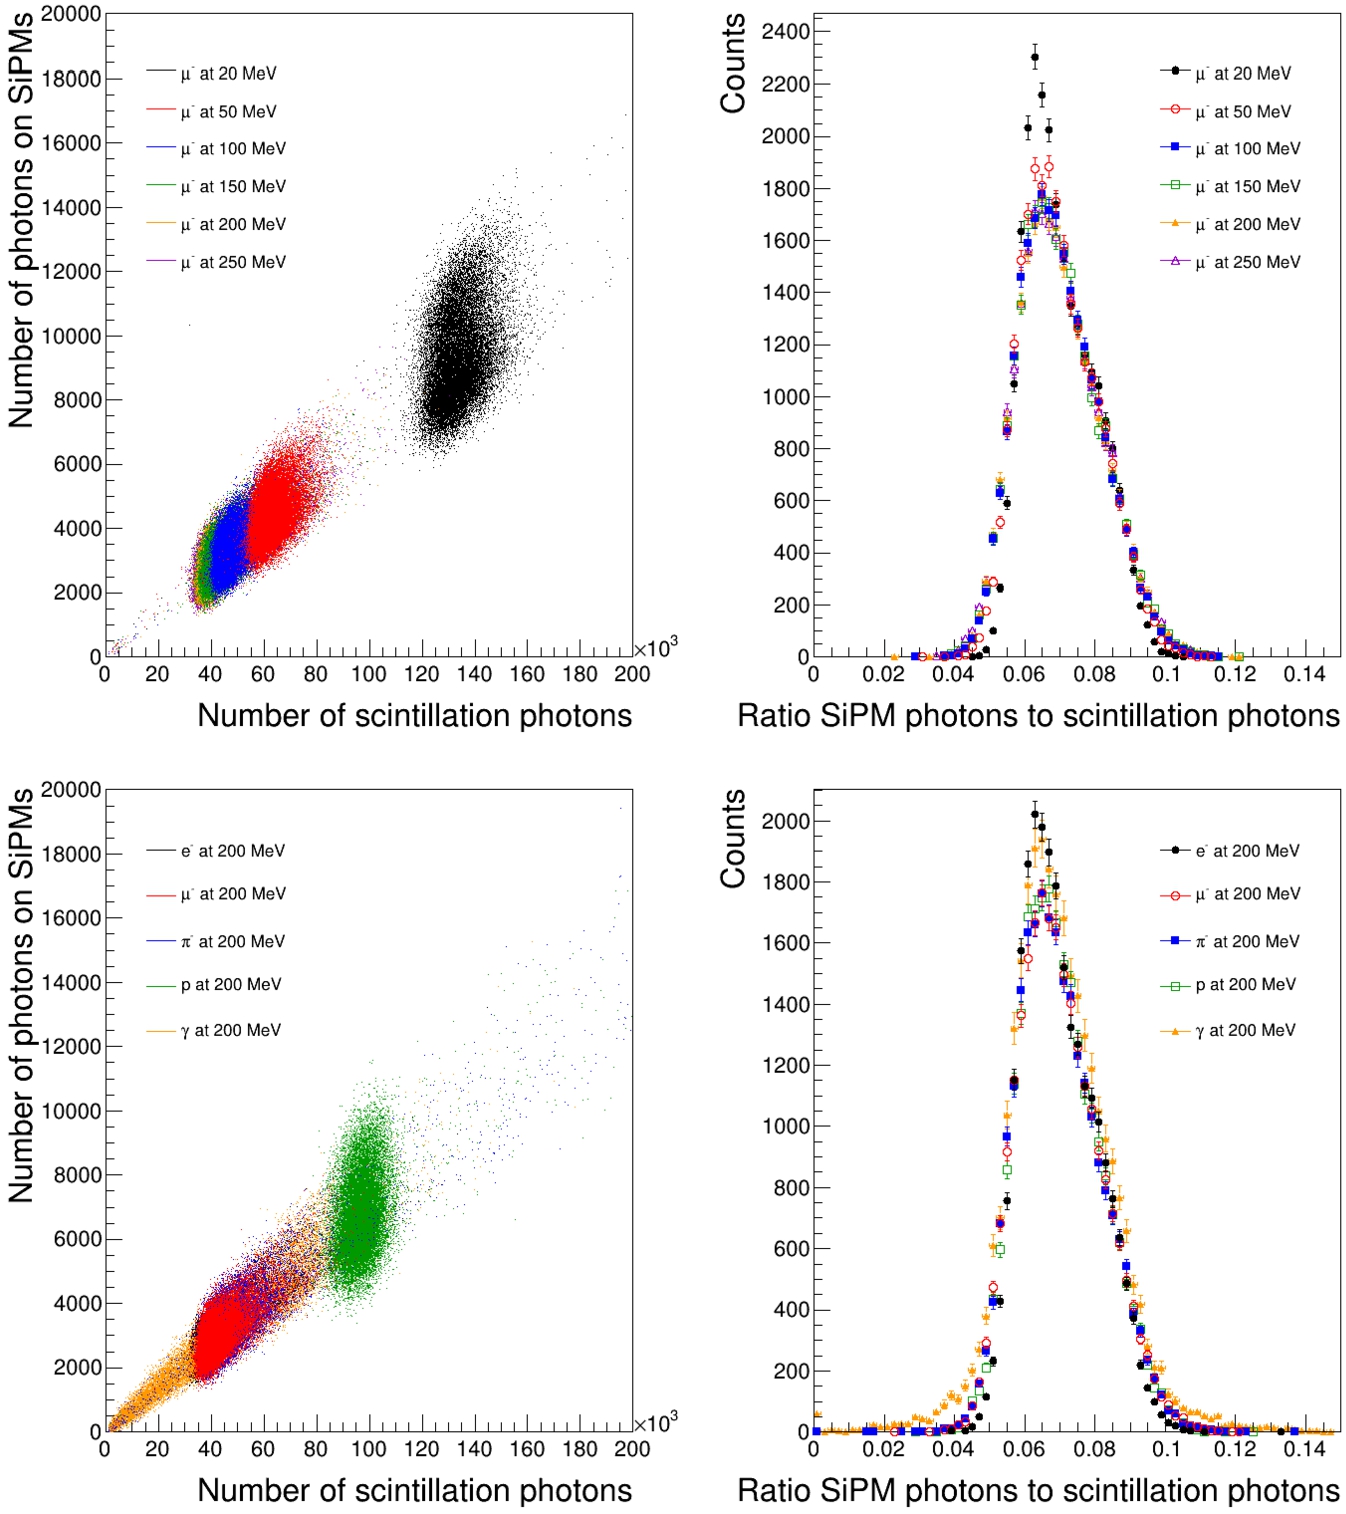 Left: the number of optical photons reaching the SiPMs as a function of the produced scintillation photons. Right: the ratio of the number of optical photons at the SiPMs over all scintillation photons. The top distributions show muons at a range of energies. The bottom distributions show distributions for a range of particles at 200 MeV kinetic energy.